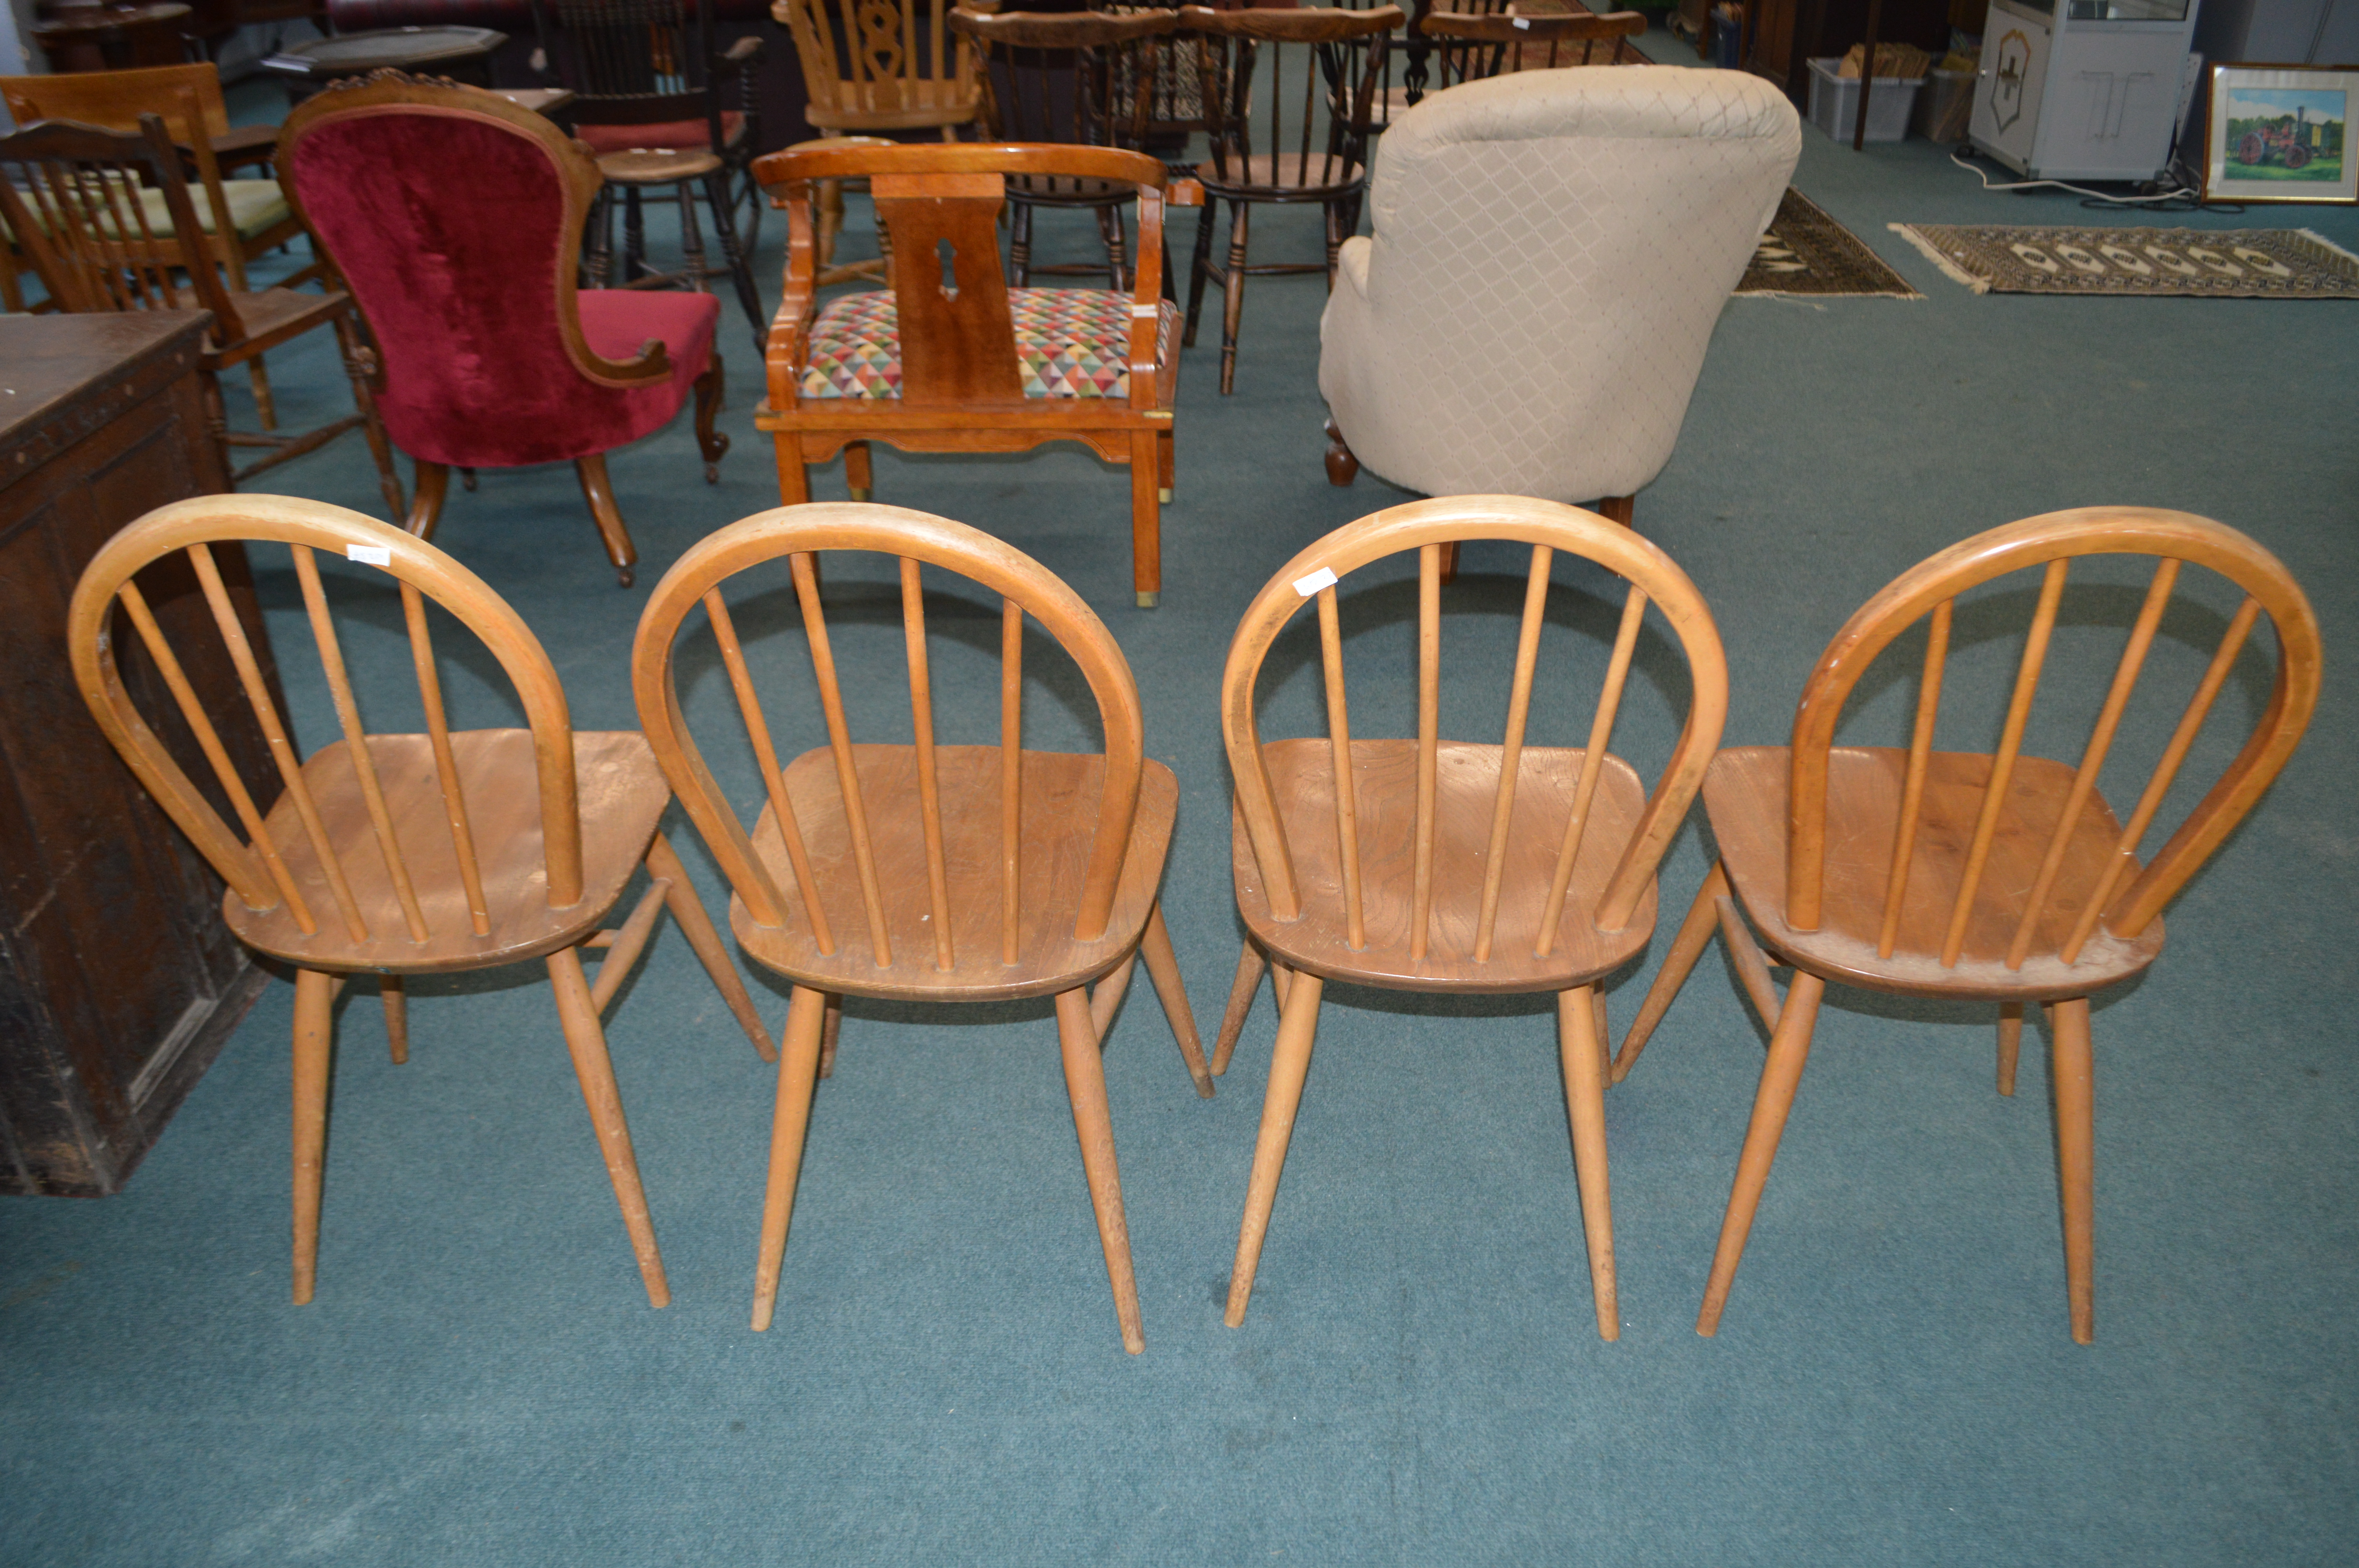 Set of Four Ercol Spindle Back Chairs - Image 3 of 3